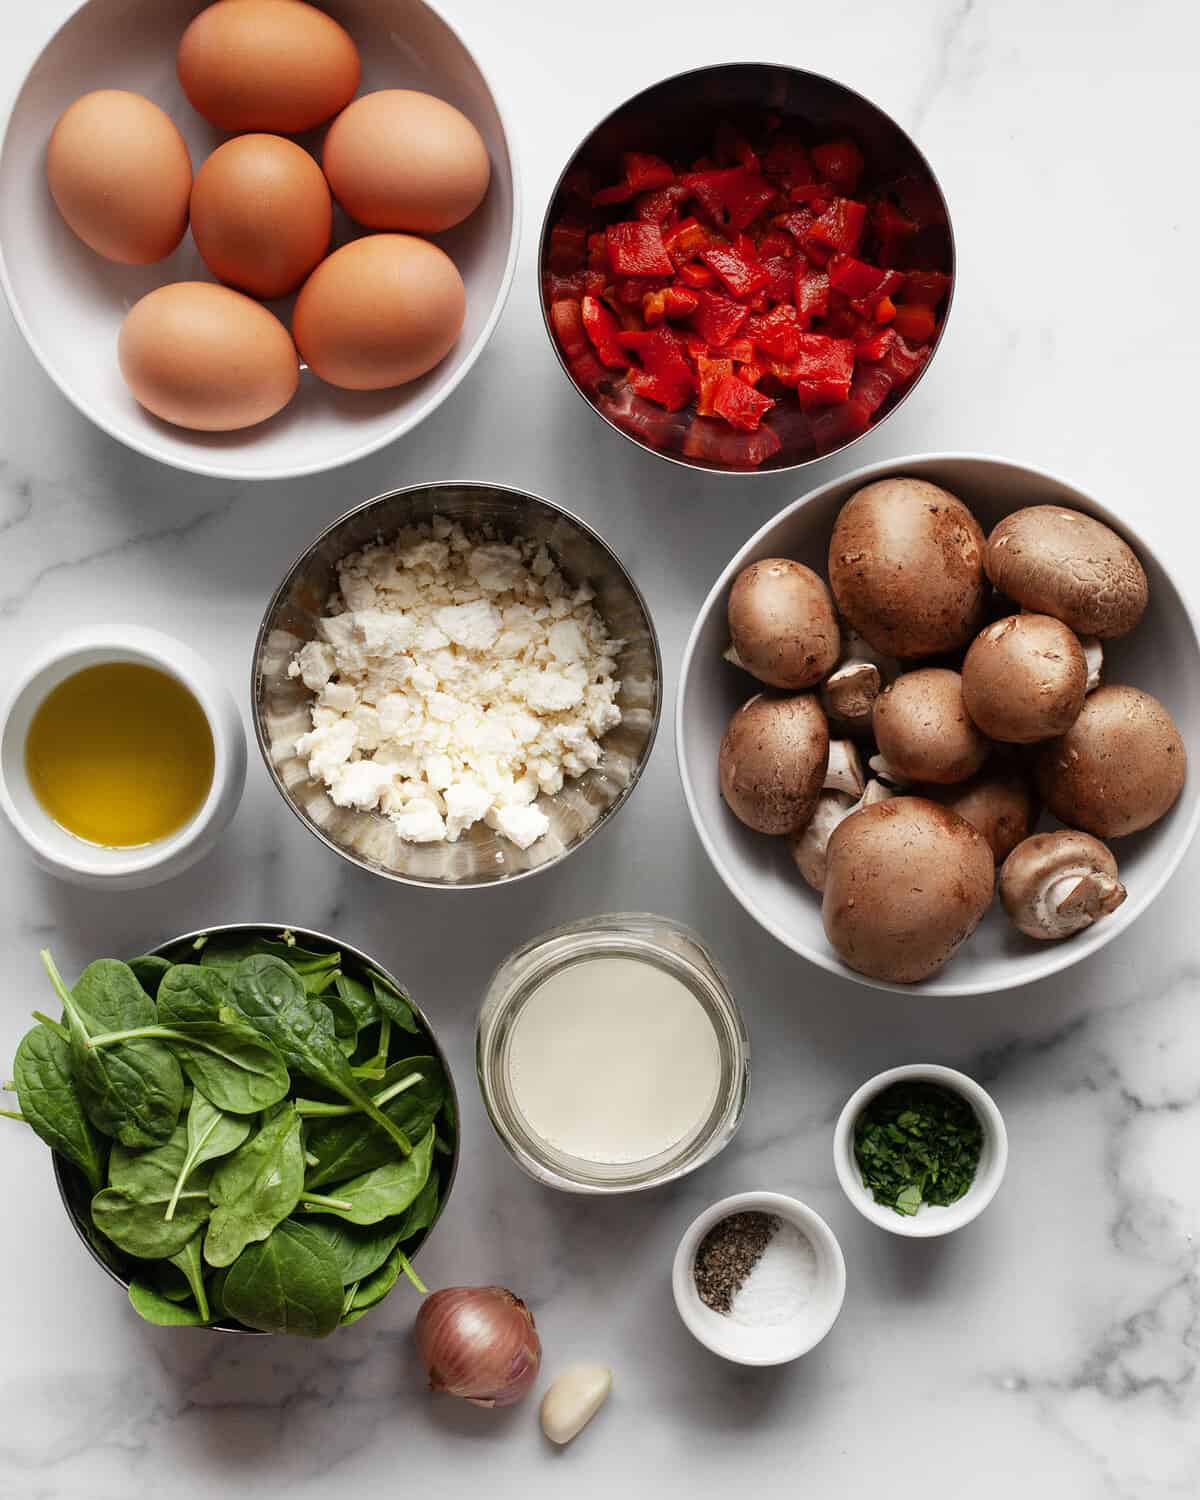 Ingredients including eggs, milk, mushrooms, peppers, shallots, feta, spinach, olive oil, salt and pepper.